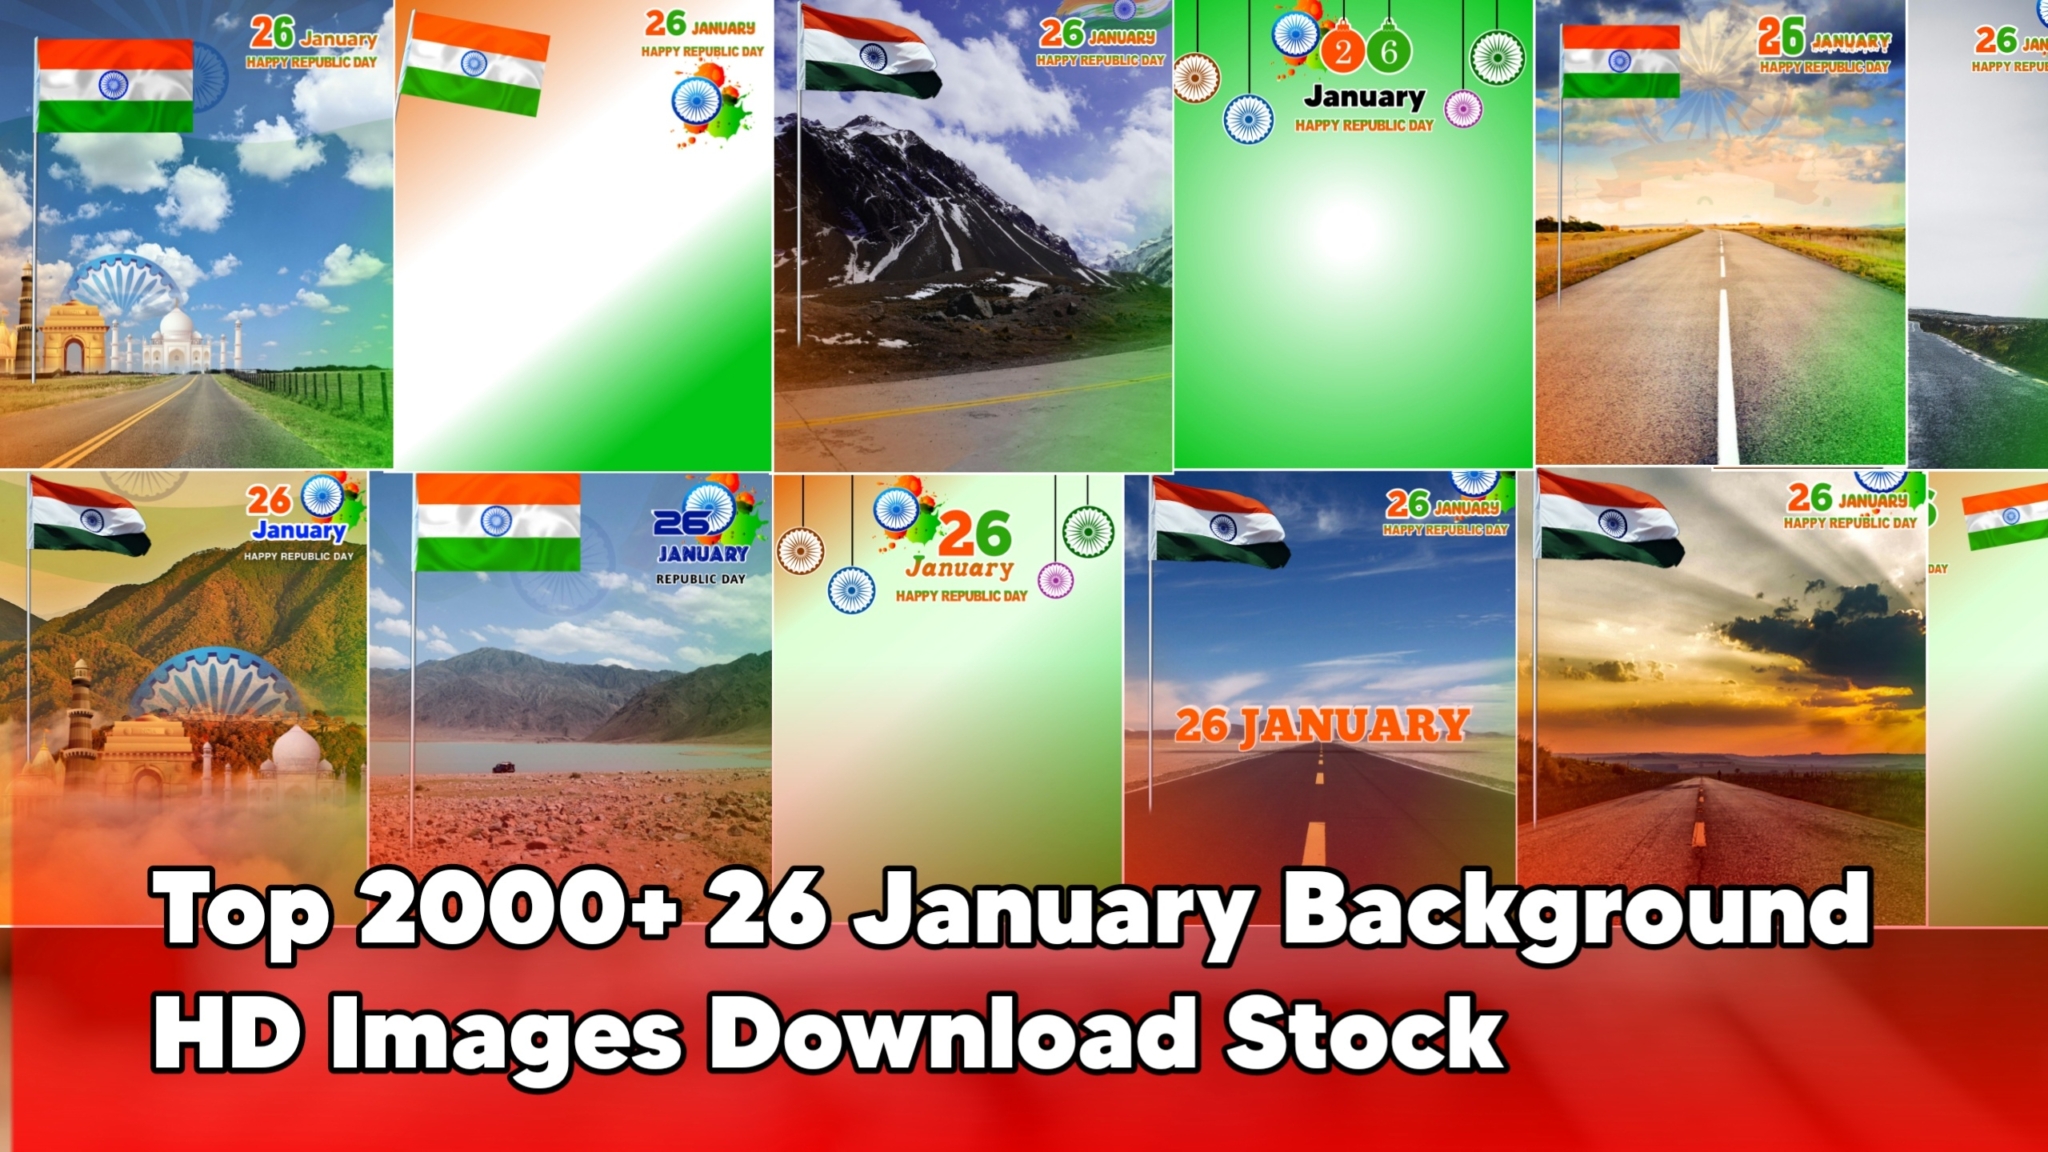 Top 2000+ 26 January Background HD Images Download Stock